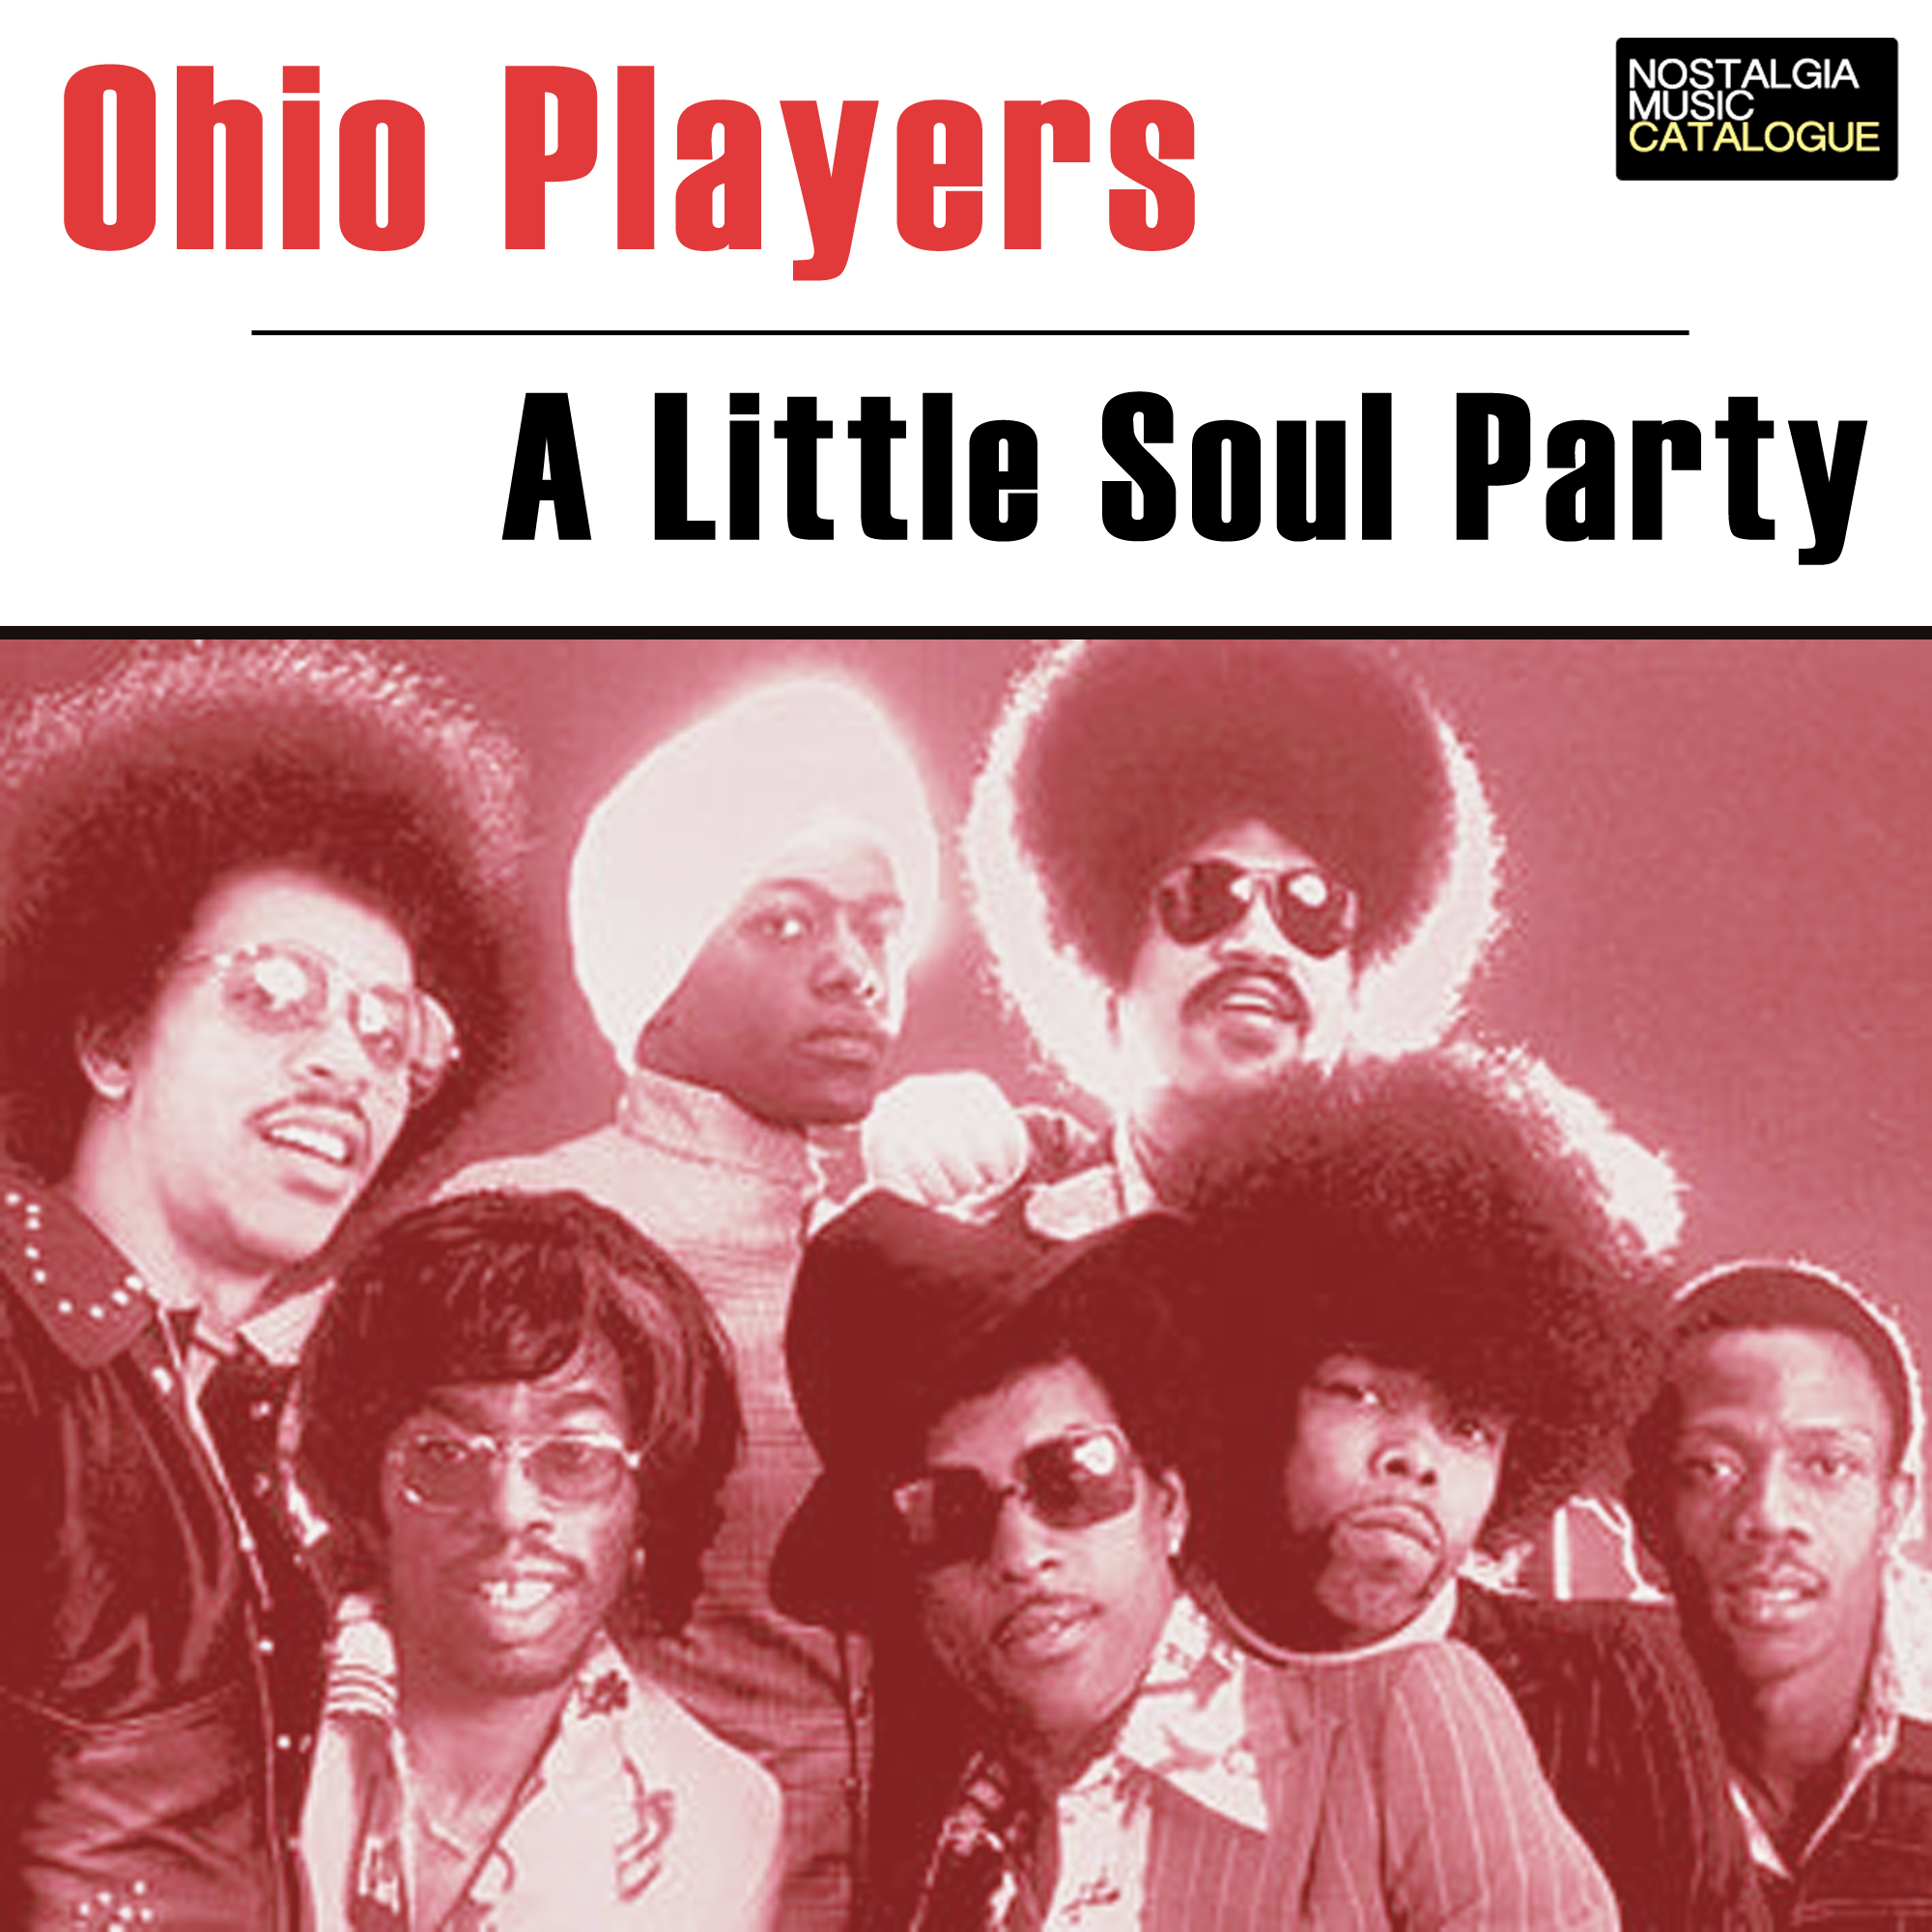 Ohio Players- A Little Soul Party